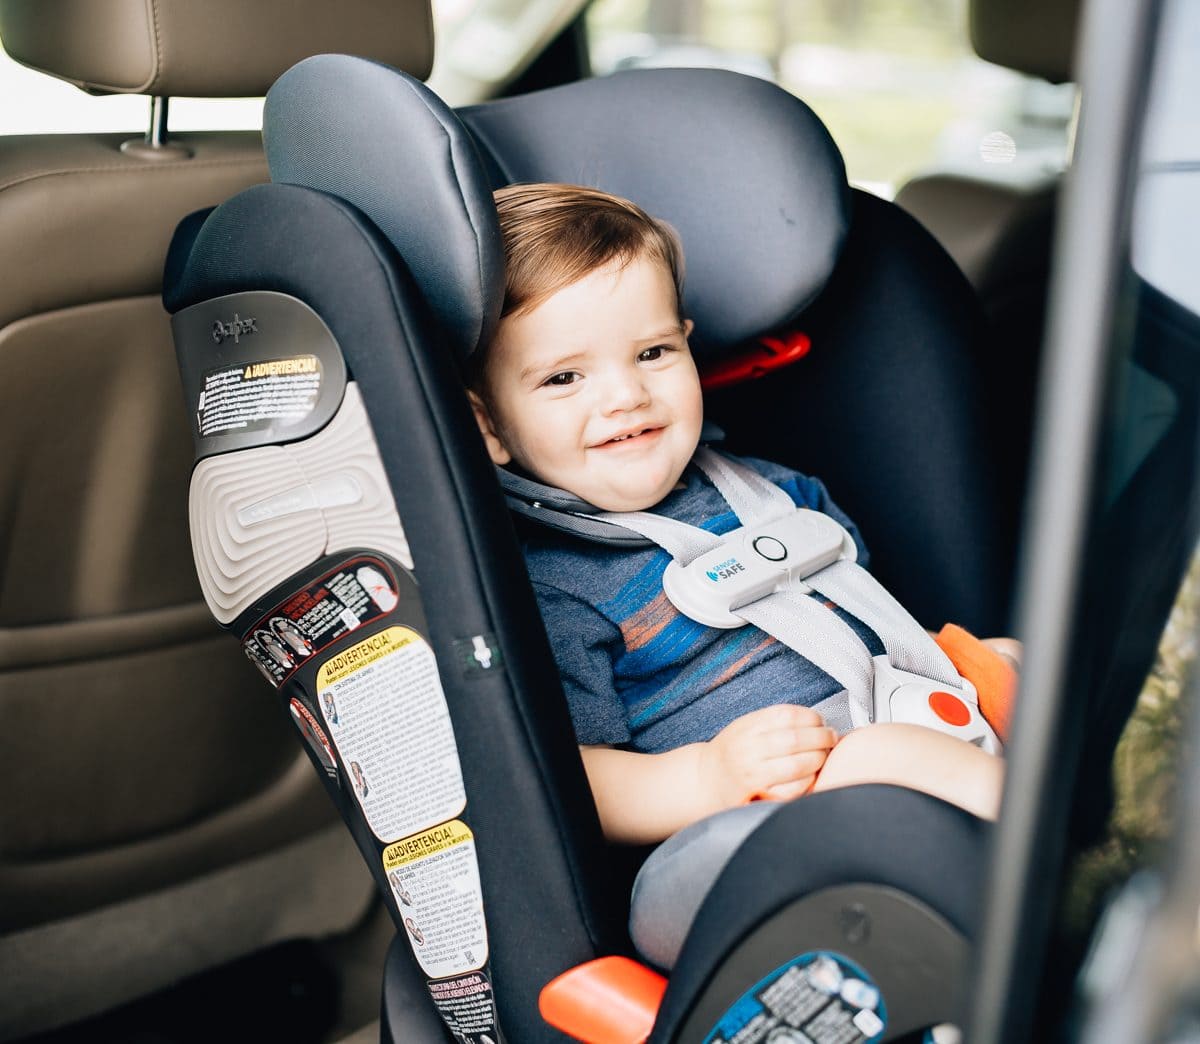 Cybex Car Seat Review: Why The Eternis S With Sensorsafe Is The Only Car Seat You Need